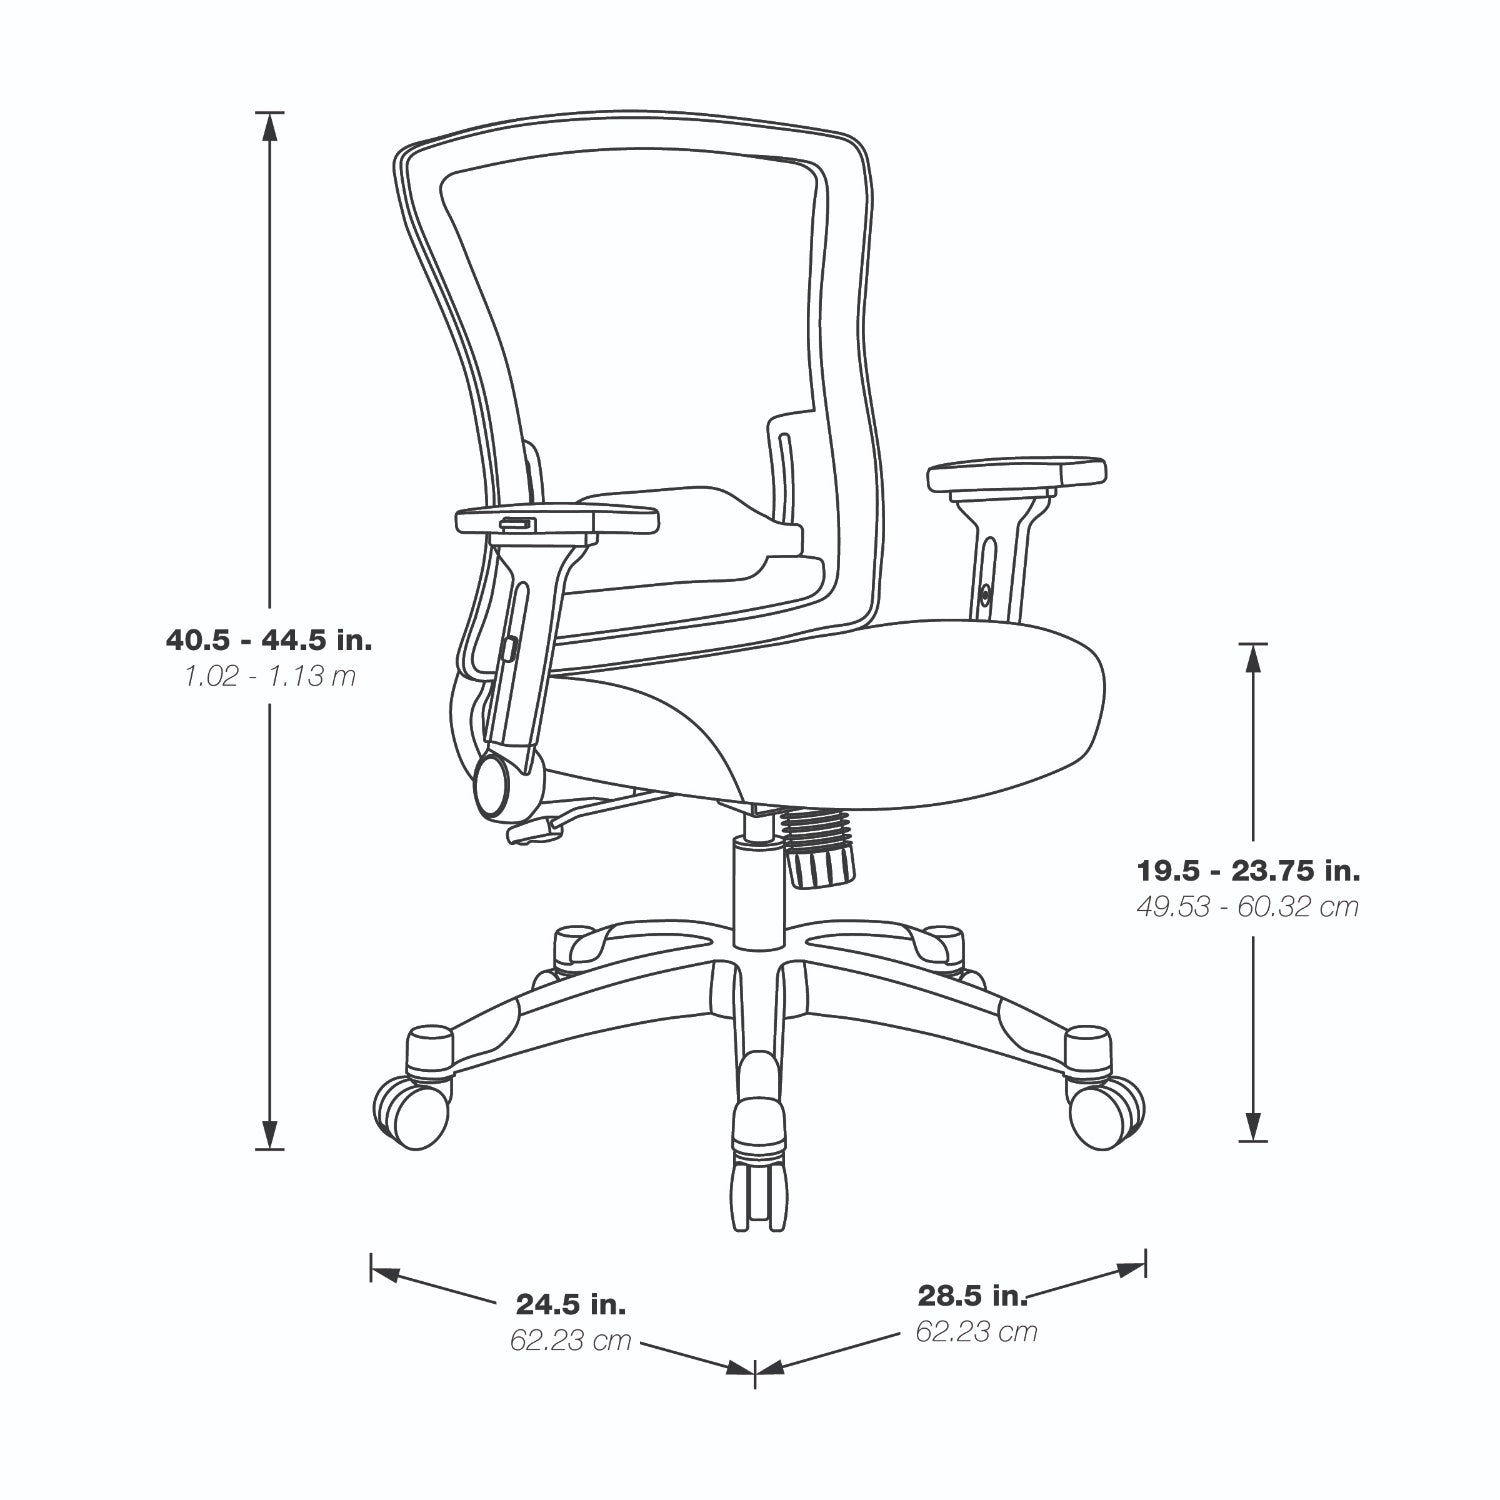 Professional Light AirGrid® Back Manager's Chair with Black Bonded